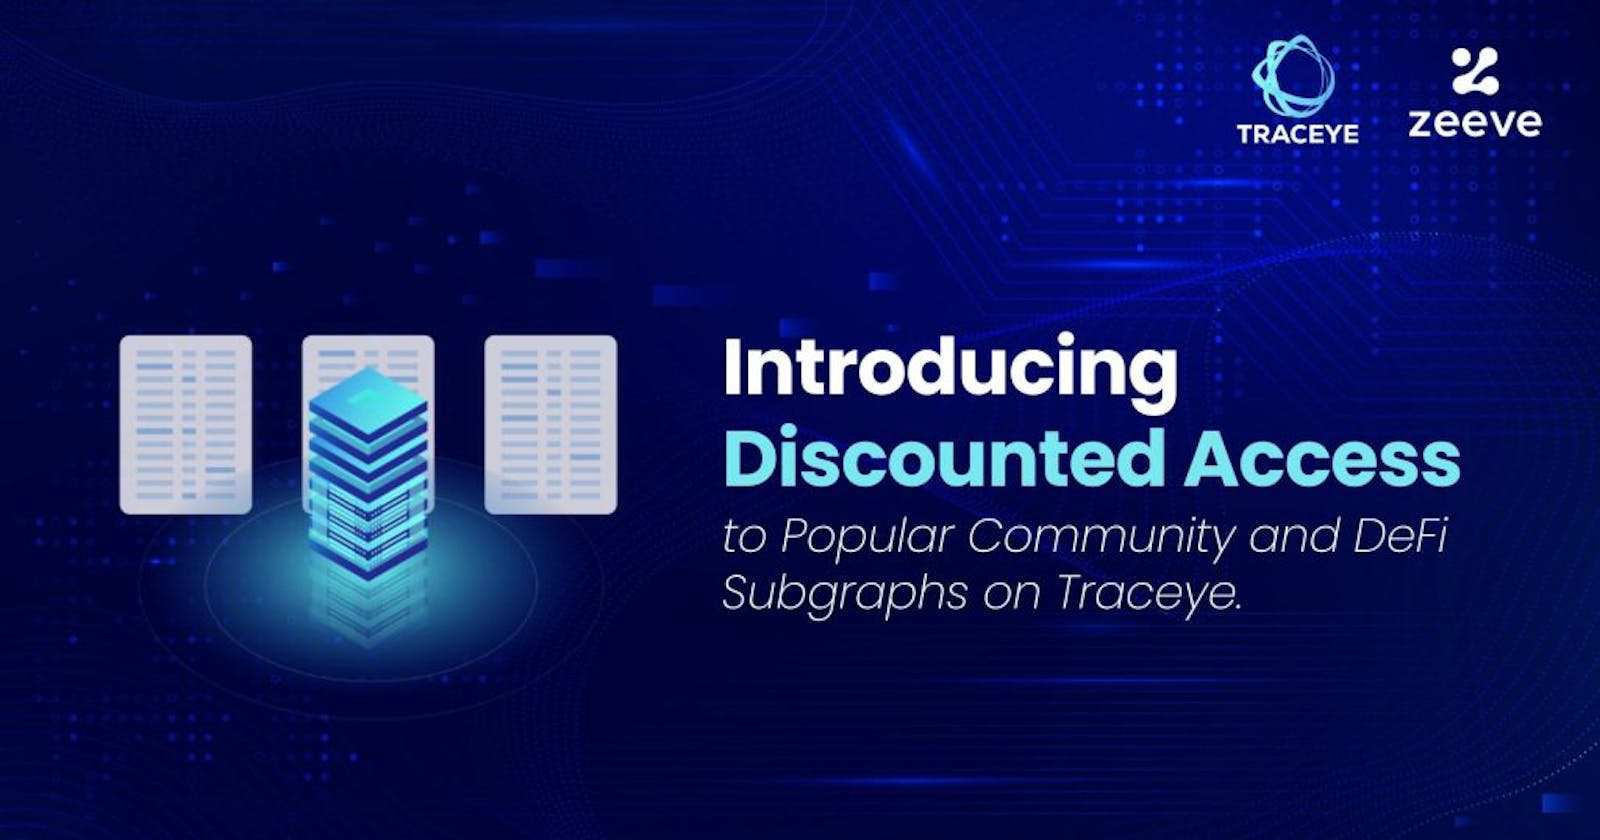 Introducing Discounted Access to Popular Community and DeFi Subgraphs on Traceye